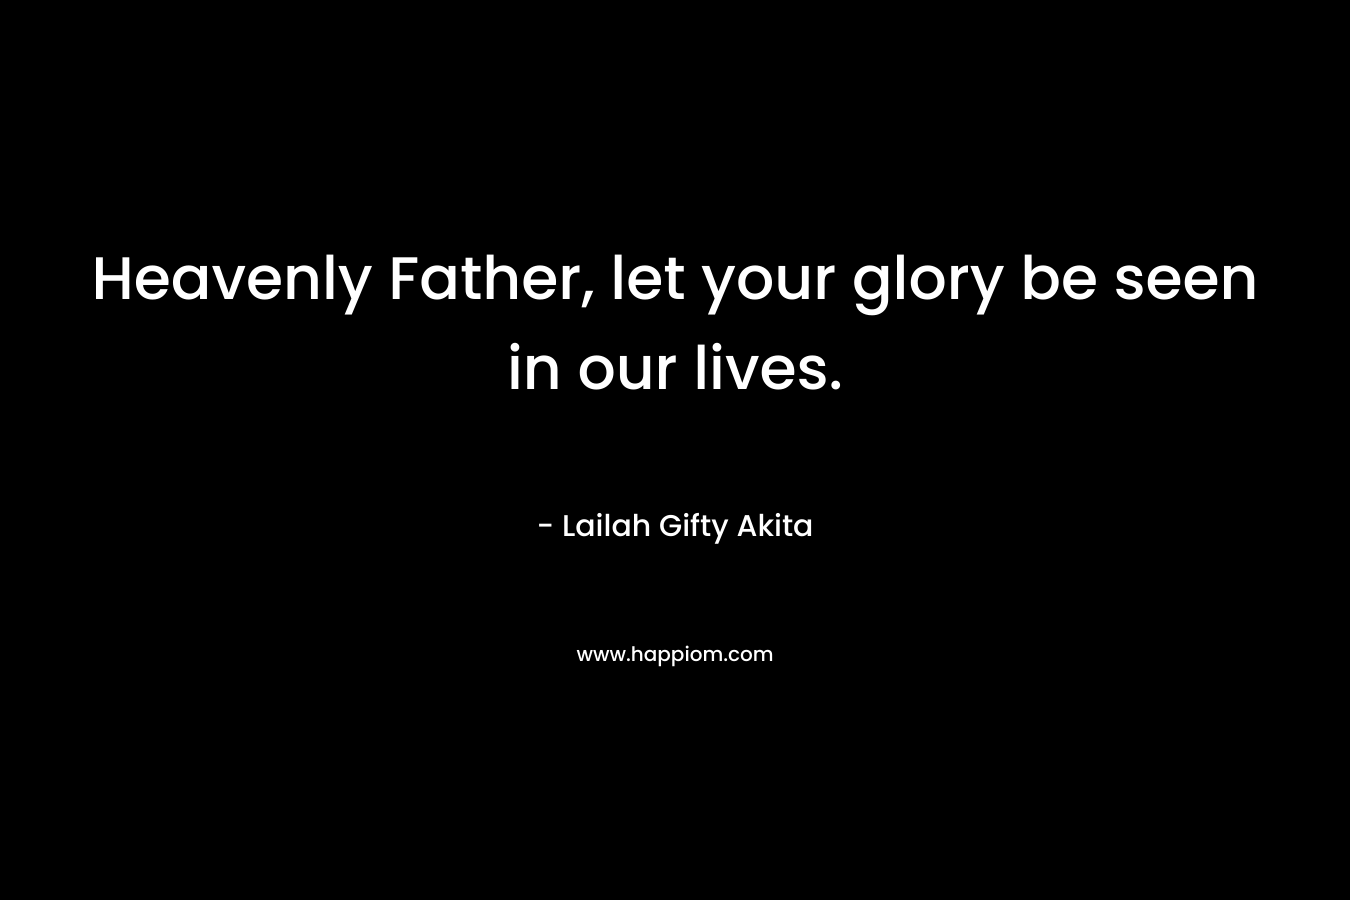 Heavenly Father, let your glory be seen in our lives.